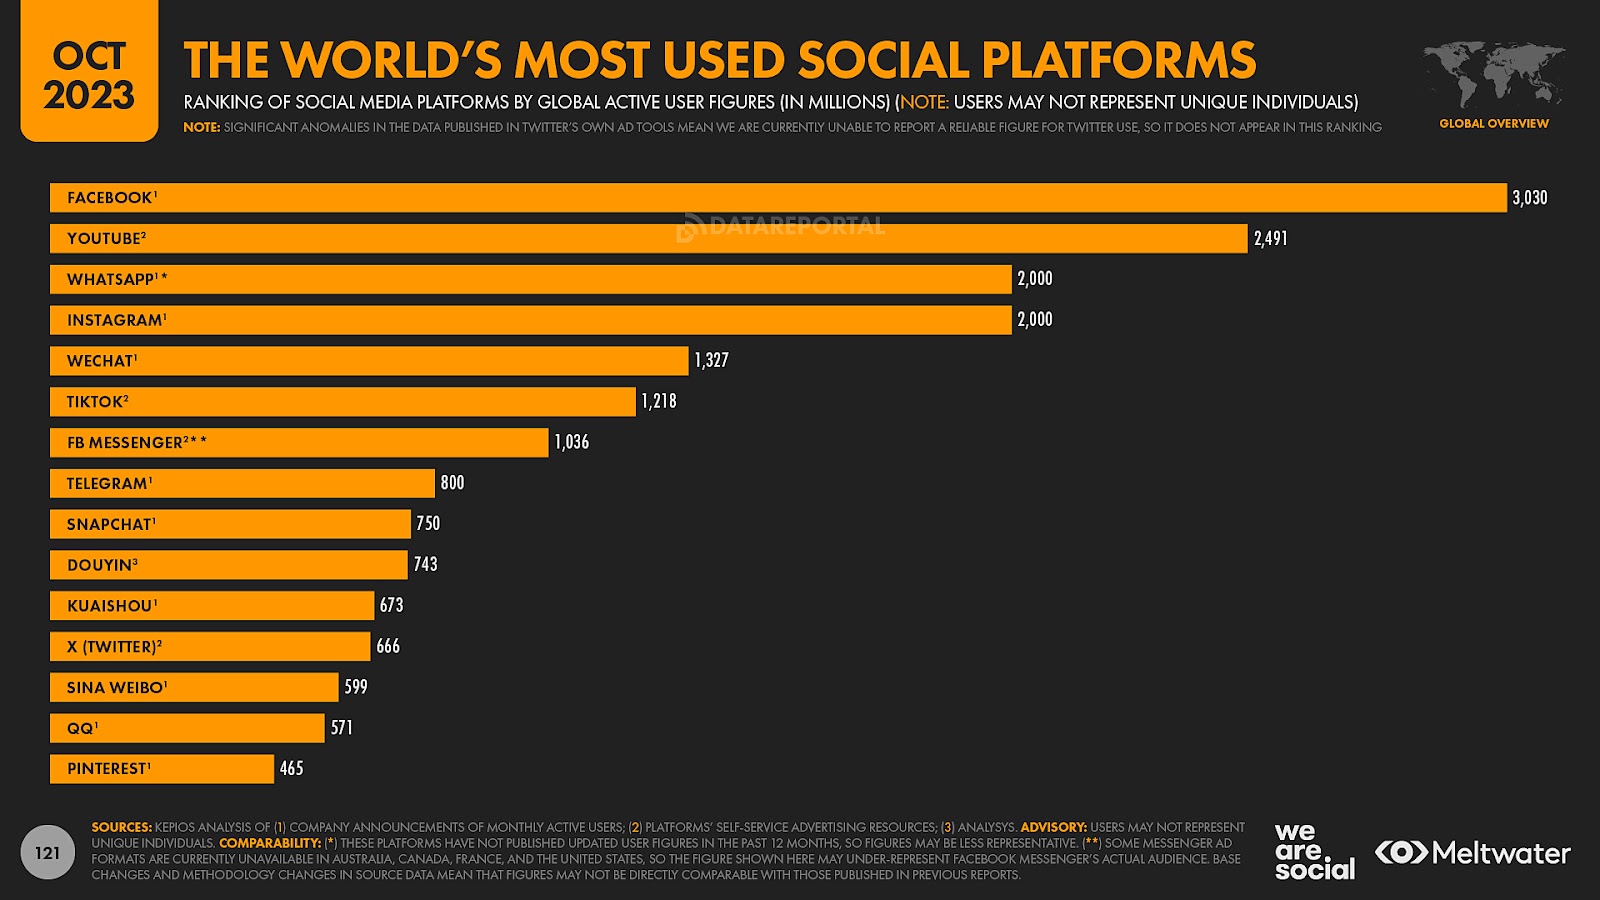 DataReportal's graph showing the world's most used social platforms